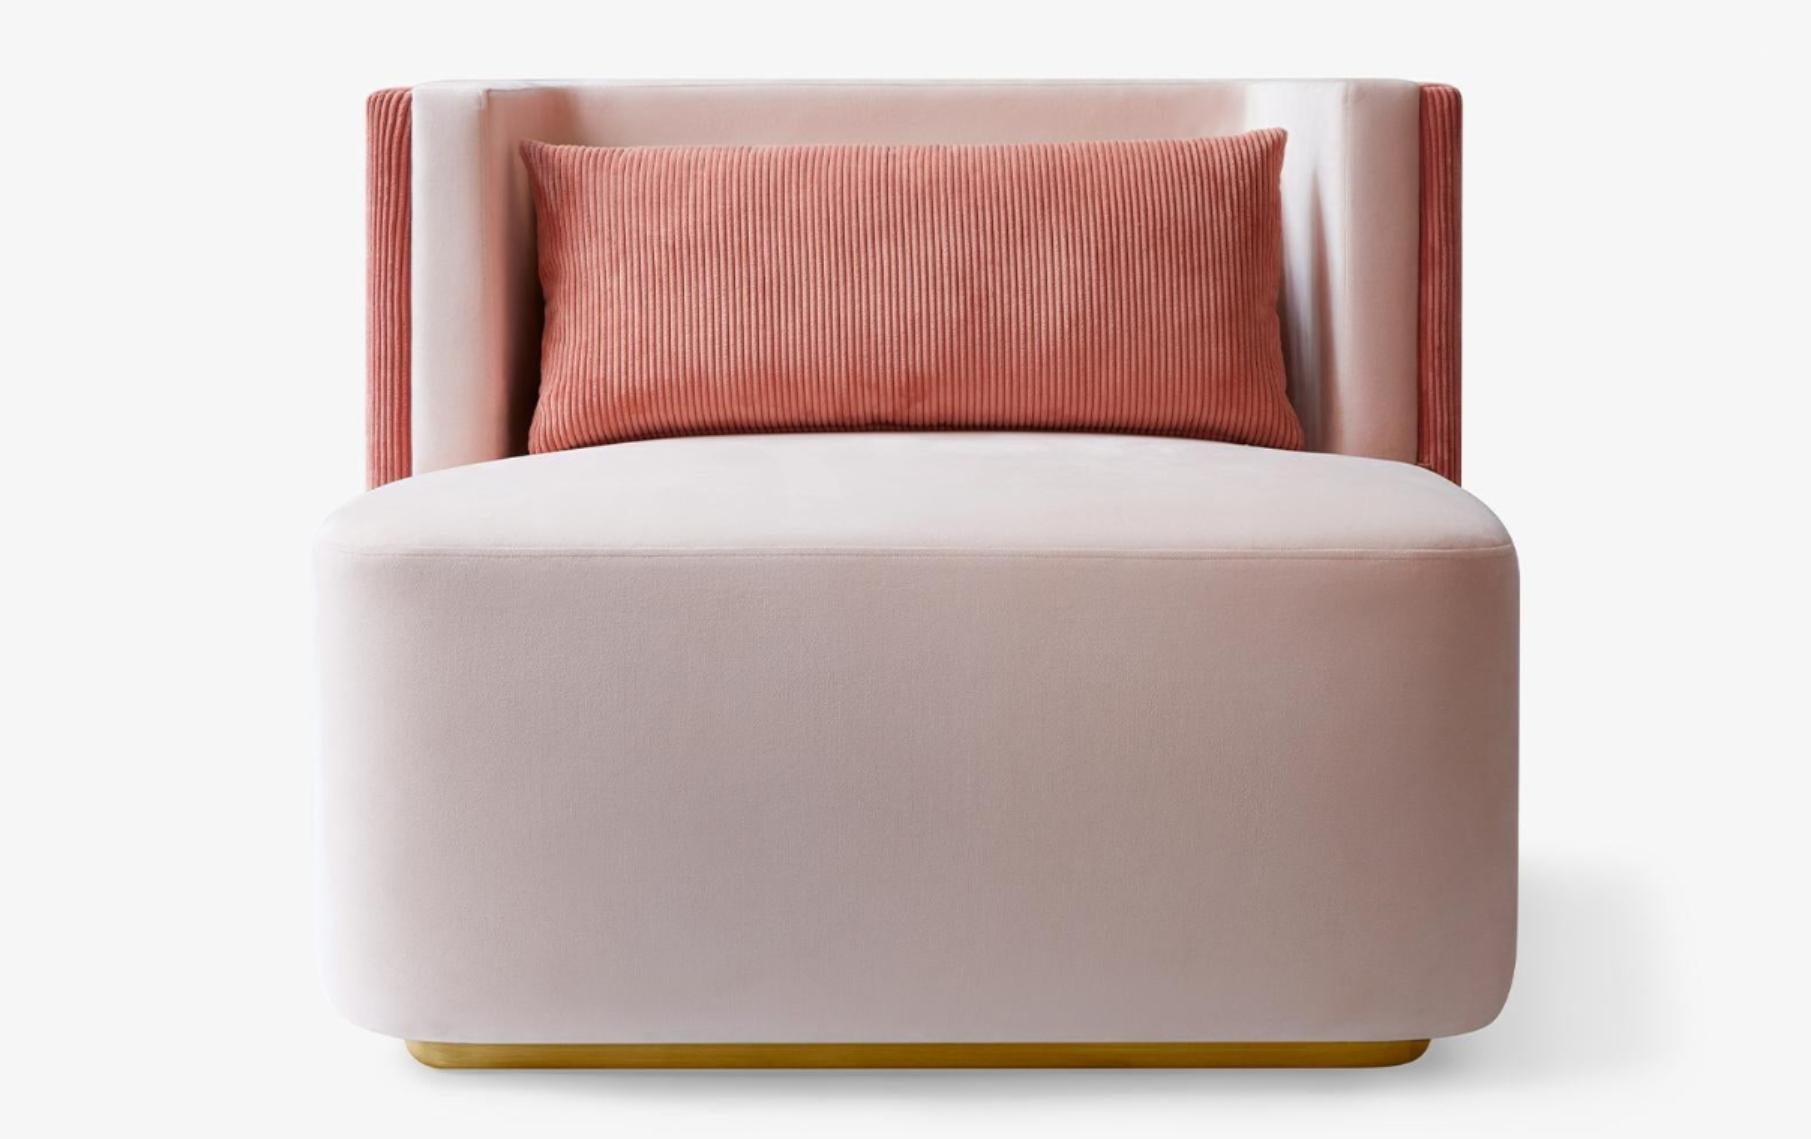 Papillonne Salmon pink armchair by Lagu
Designed by Ufuk Ceylan
Dimensions: W 80 x D 72 x H 73 cm
Materials: brass, fabric, foam, hardwood, metal, upholstery.

The Papillonne Salmon pink armchair complements your style with its flawless form